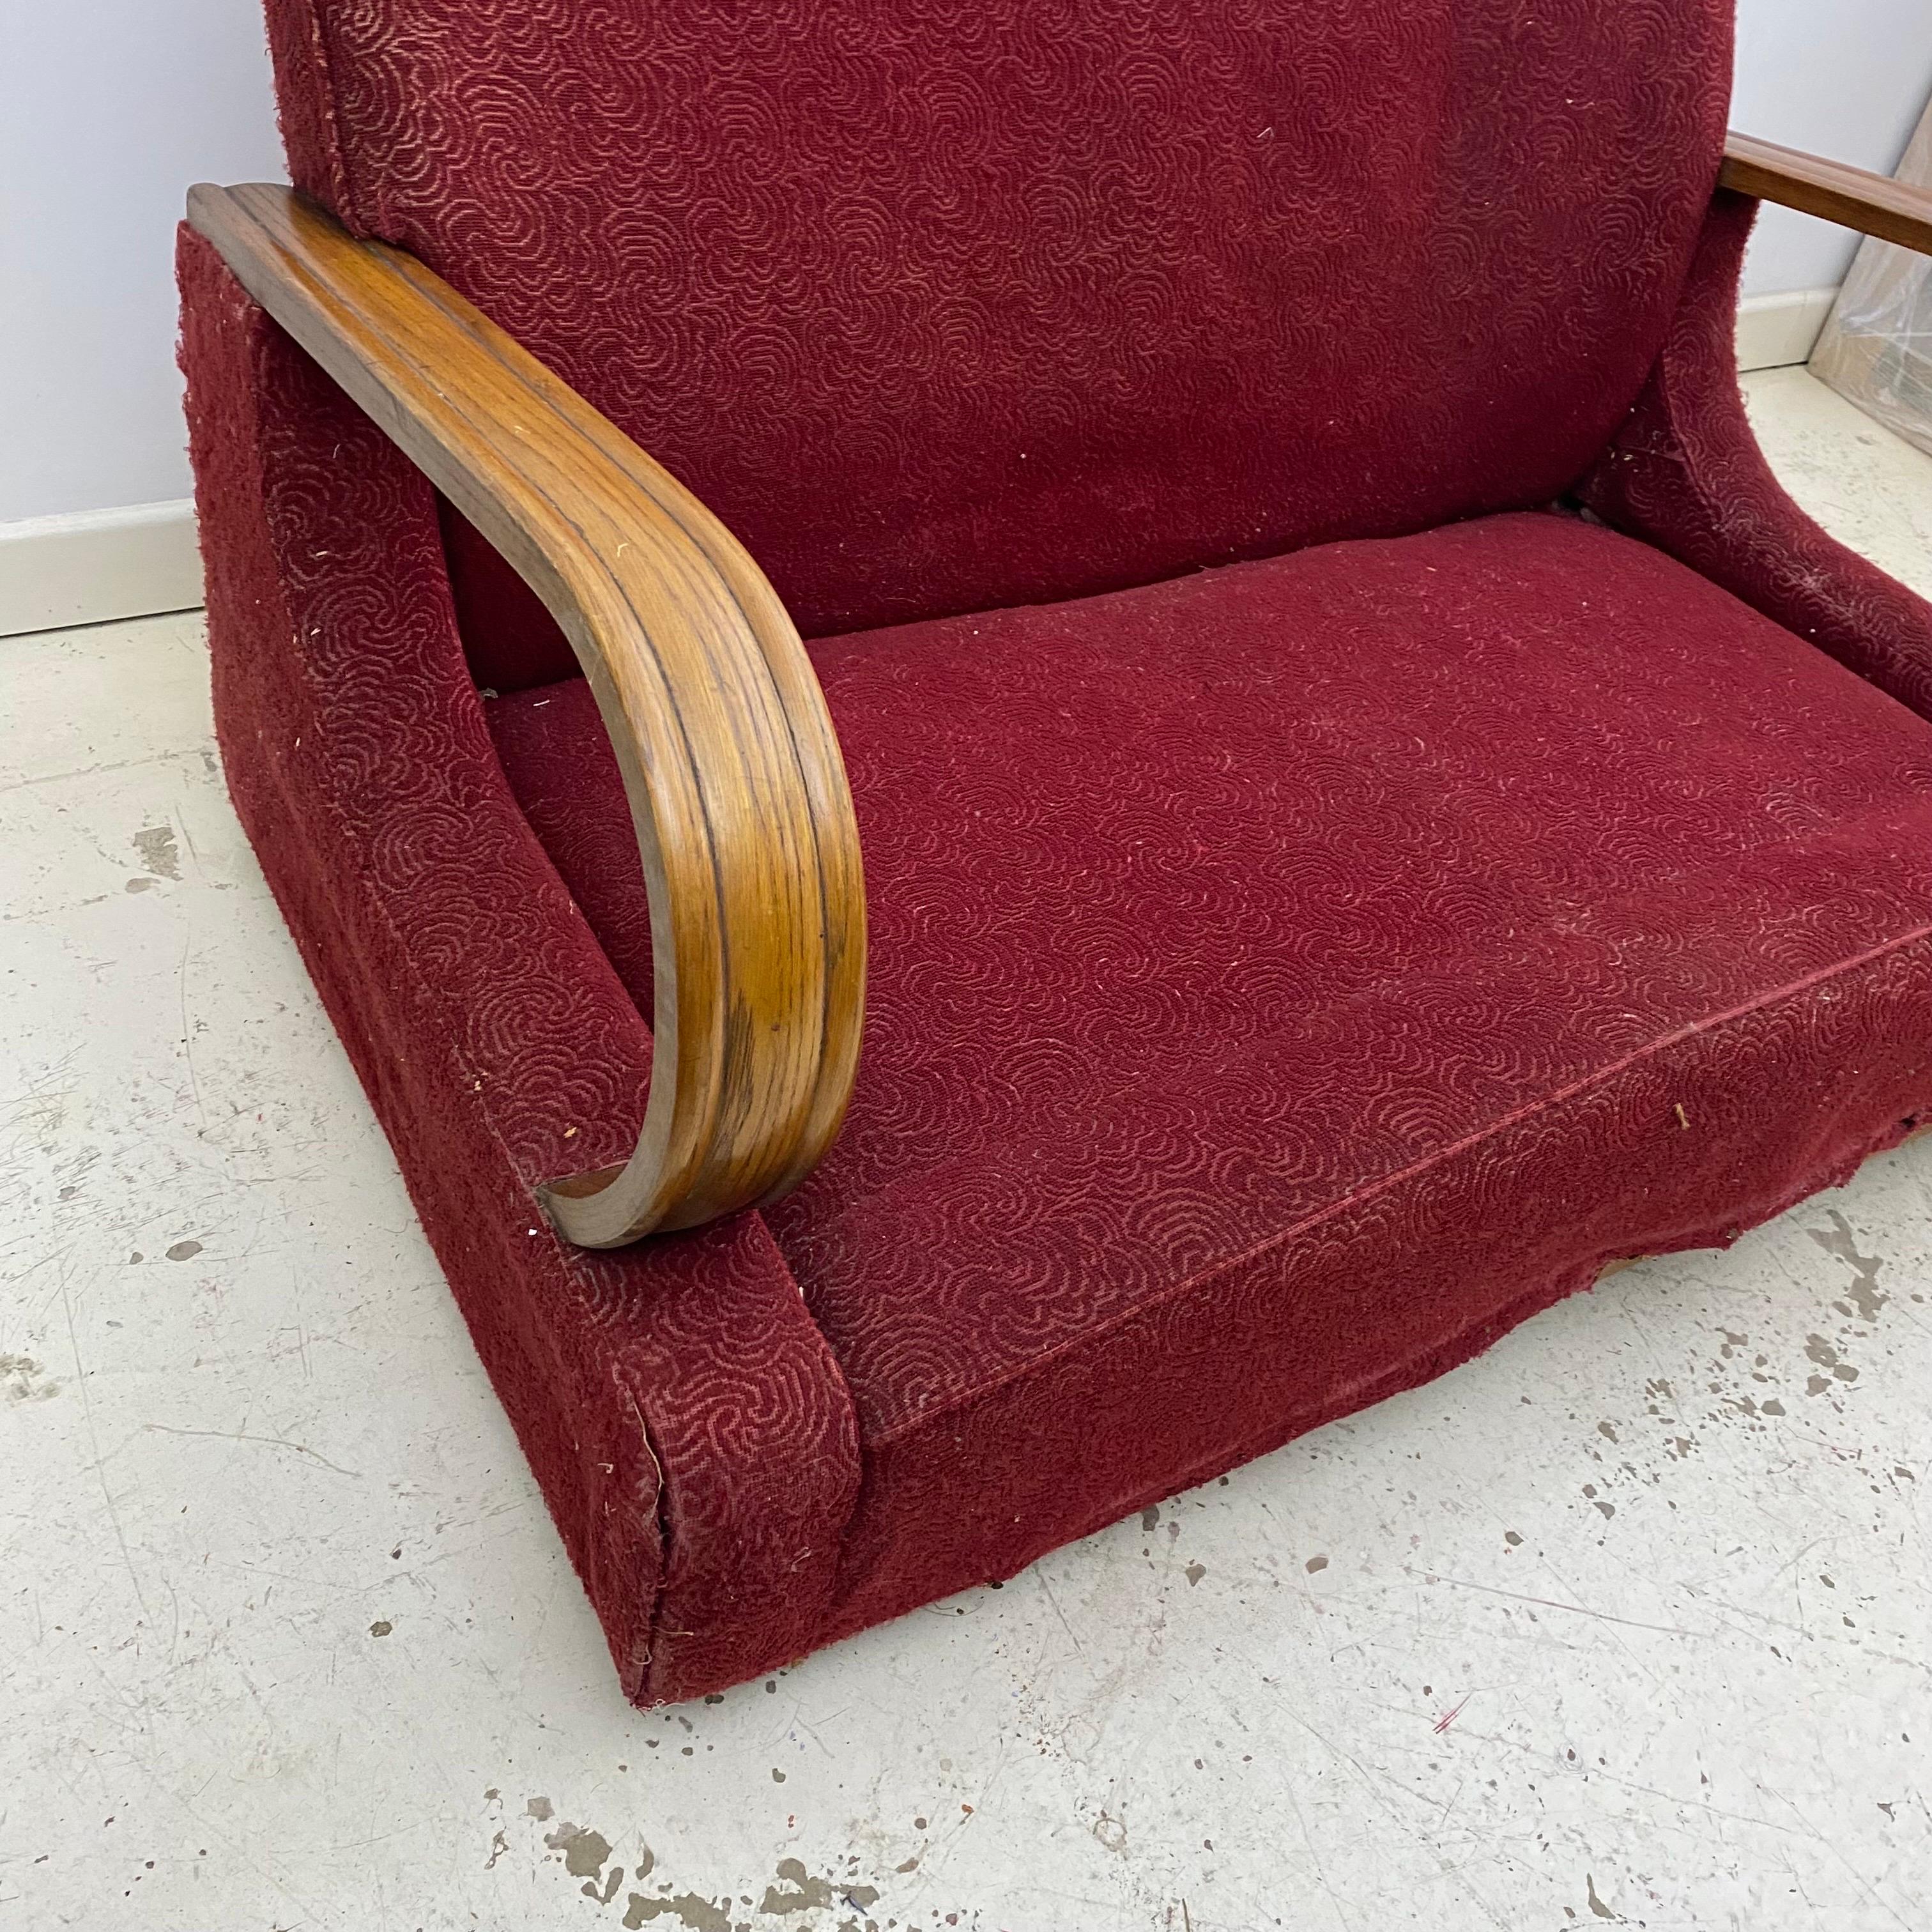 Art Deco 1940s Red Two Seater Distressed Sofa Restoration Project As Seen Poirot For Sale 3